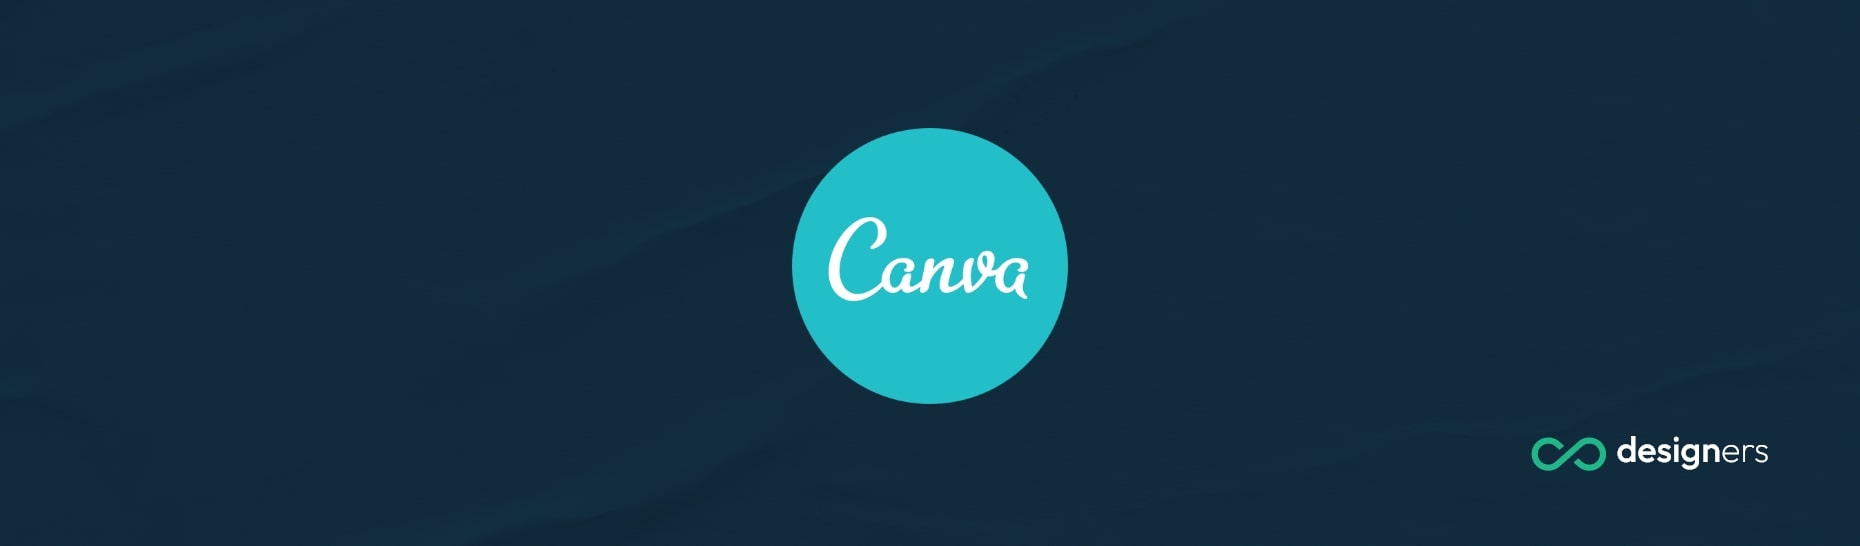 Is Canva Growing?